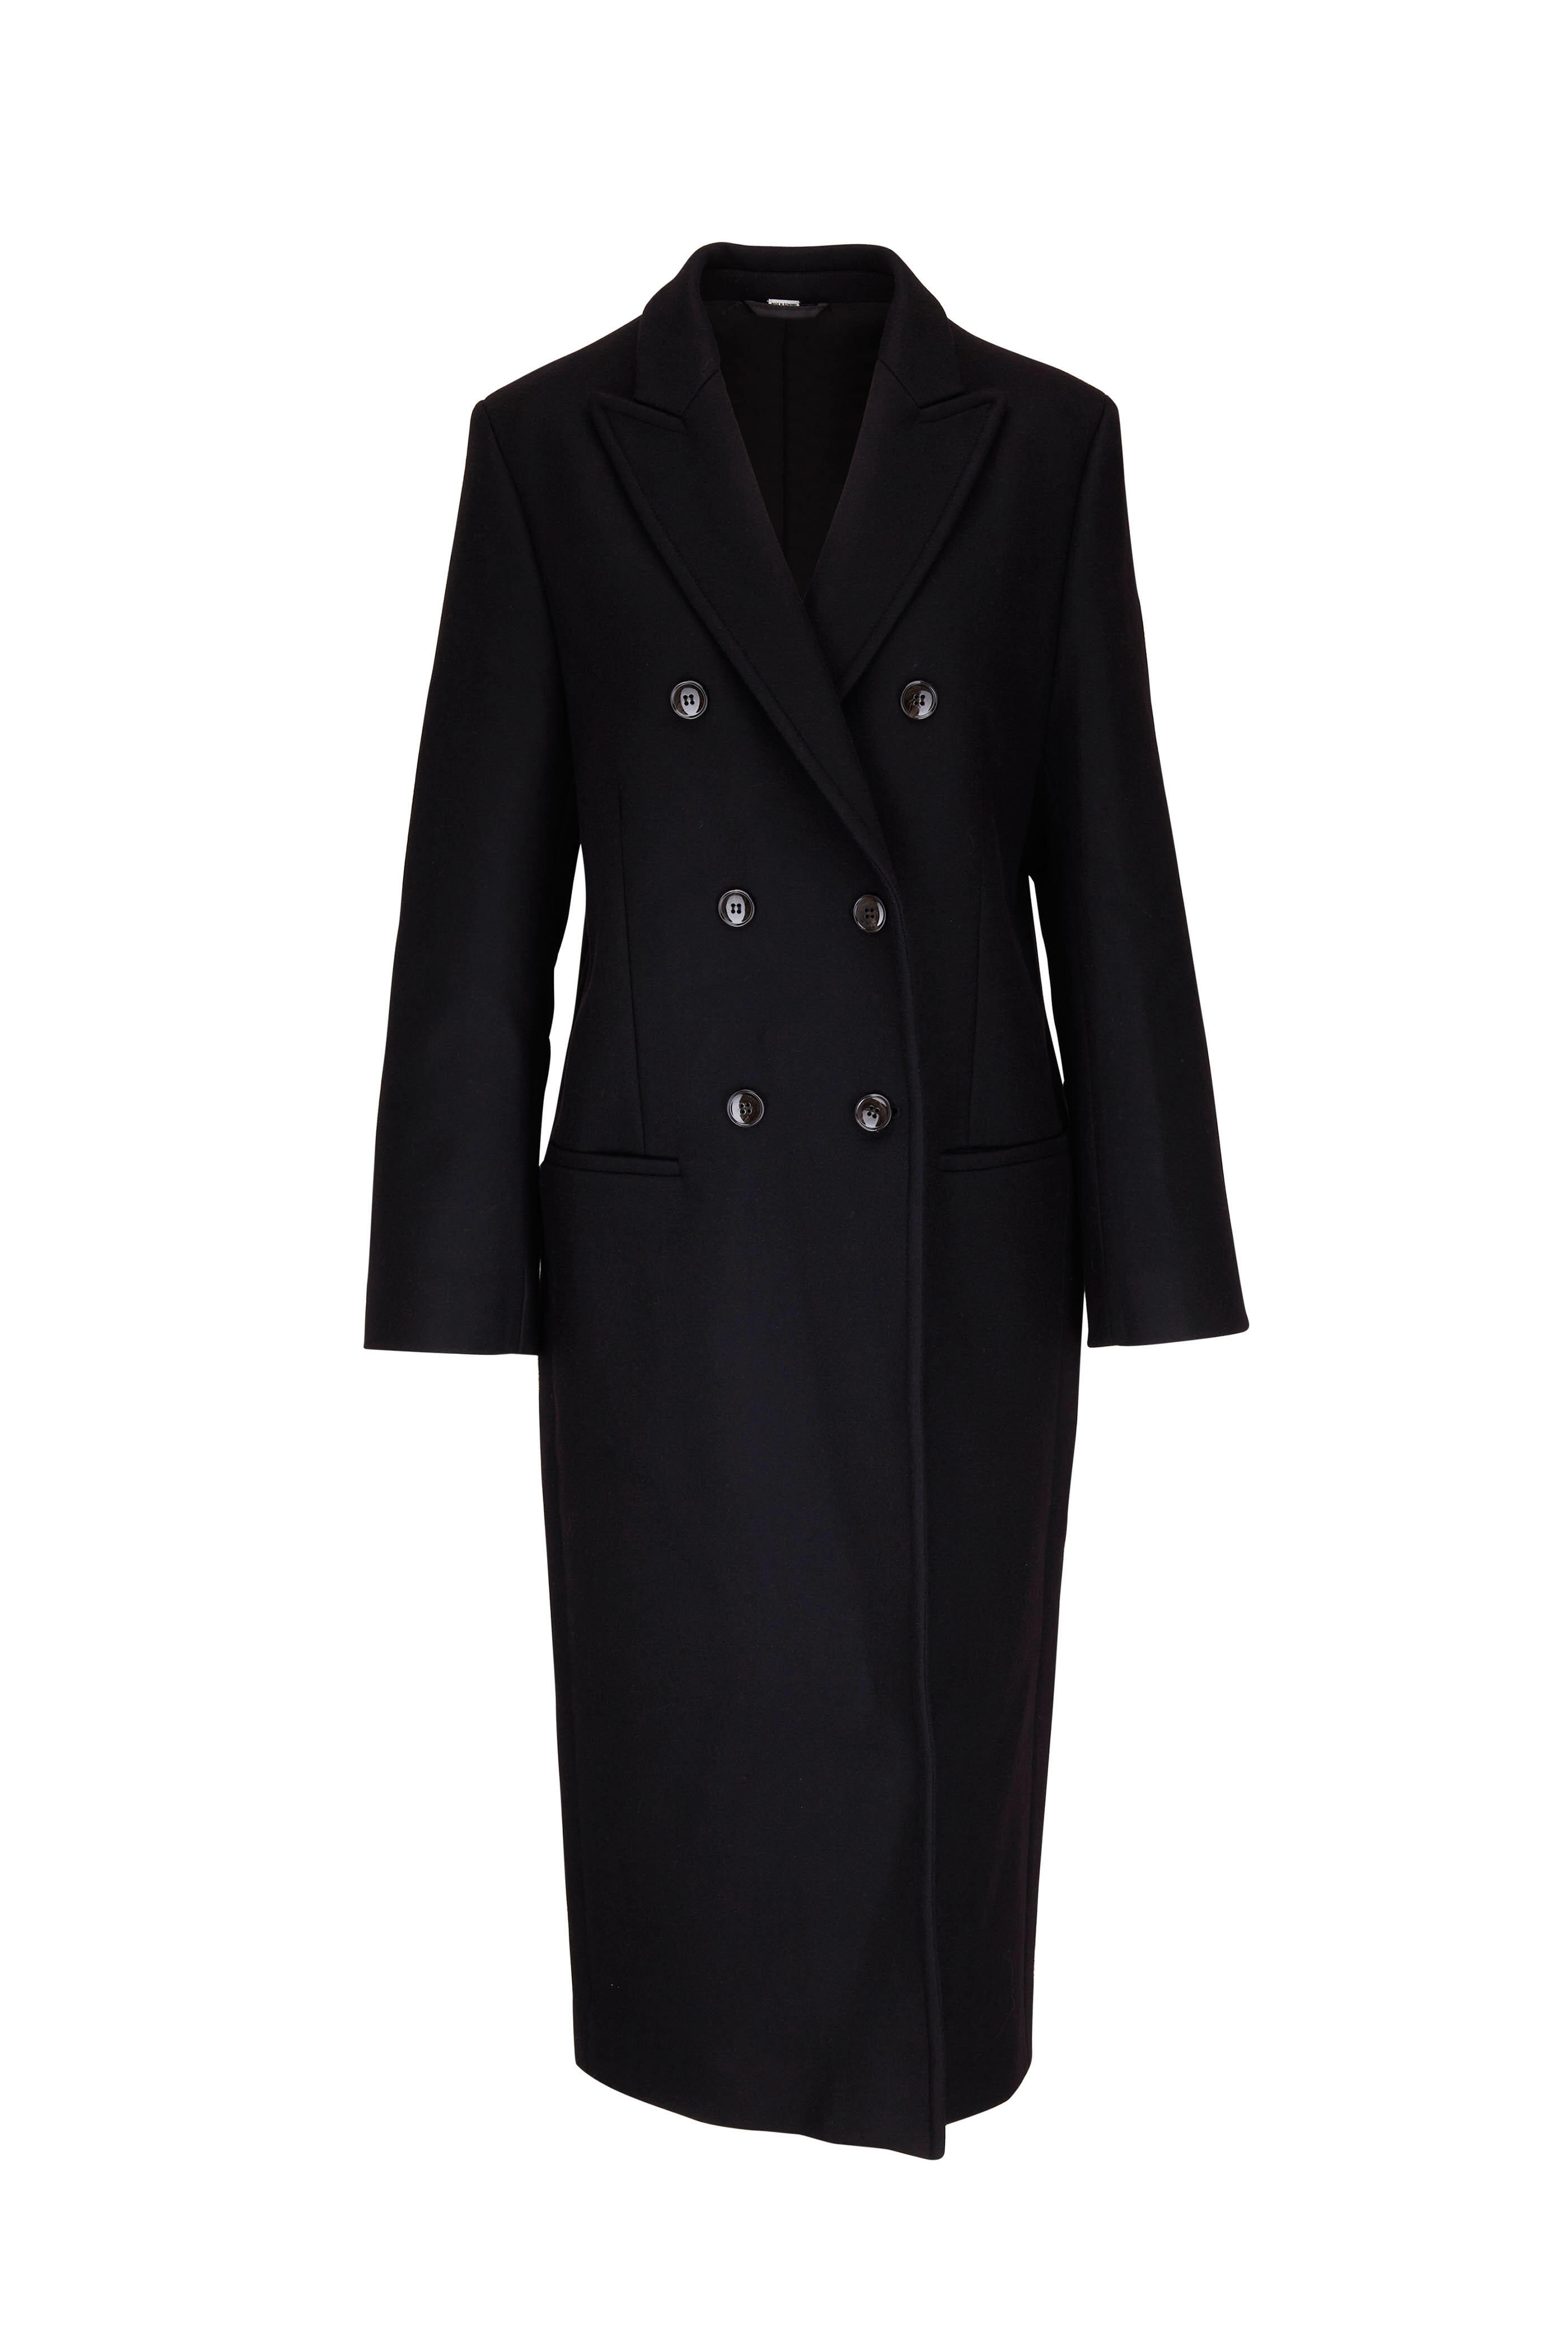 Totême - Tailored Black Wool Overcoat | Mitchell Stores